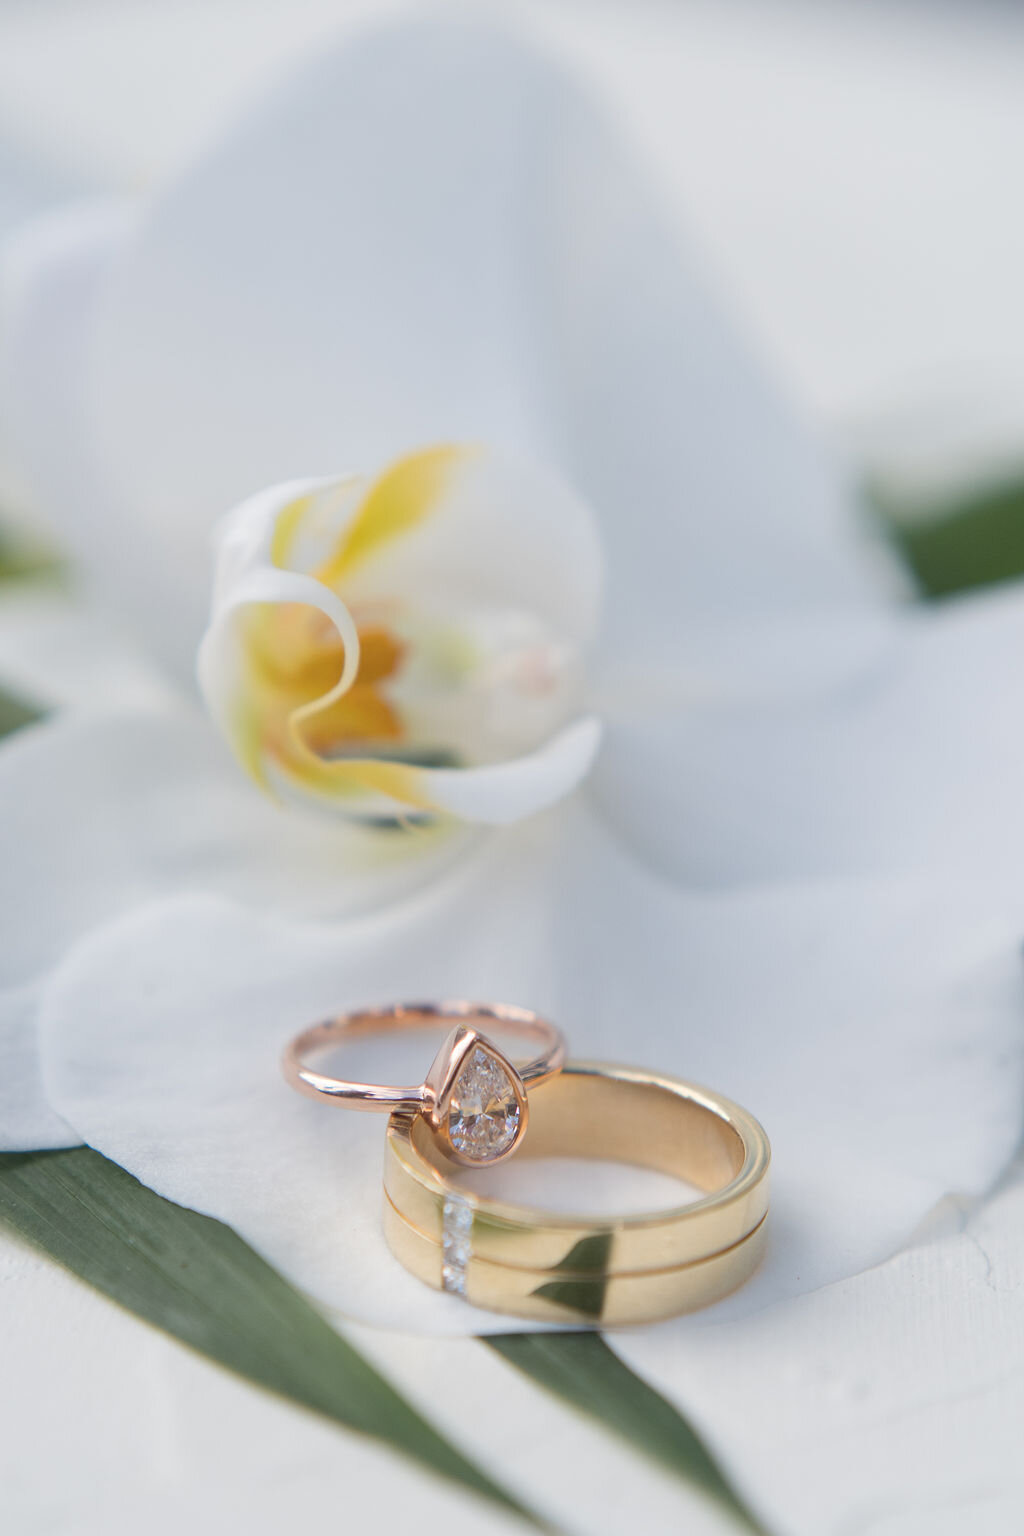 Photograph of couple's wedding rings on their wedding day at Toronto's stylish wedding venue, The One Eighty